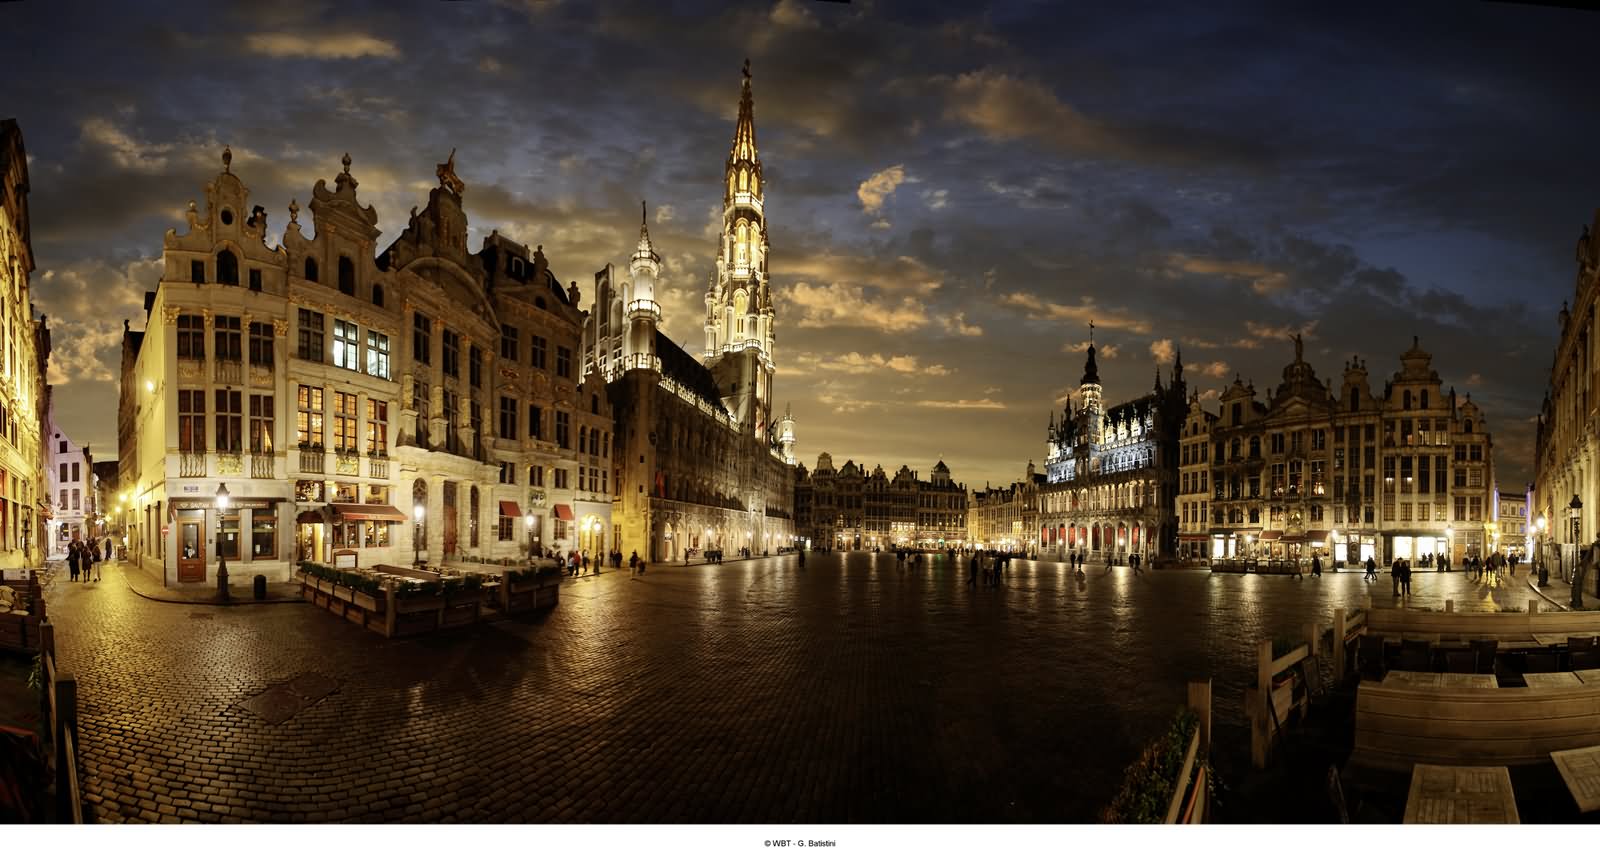 The Grand Place Night View In Brussels